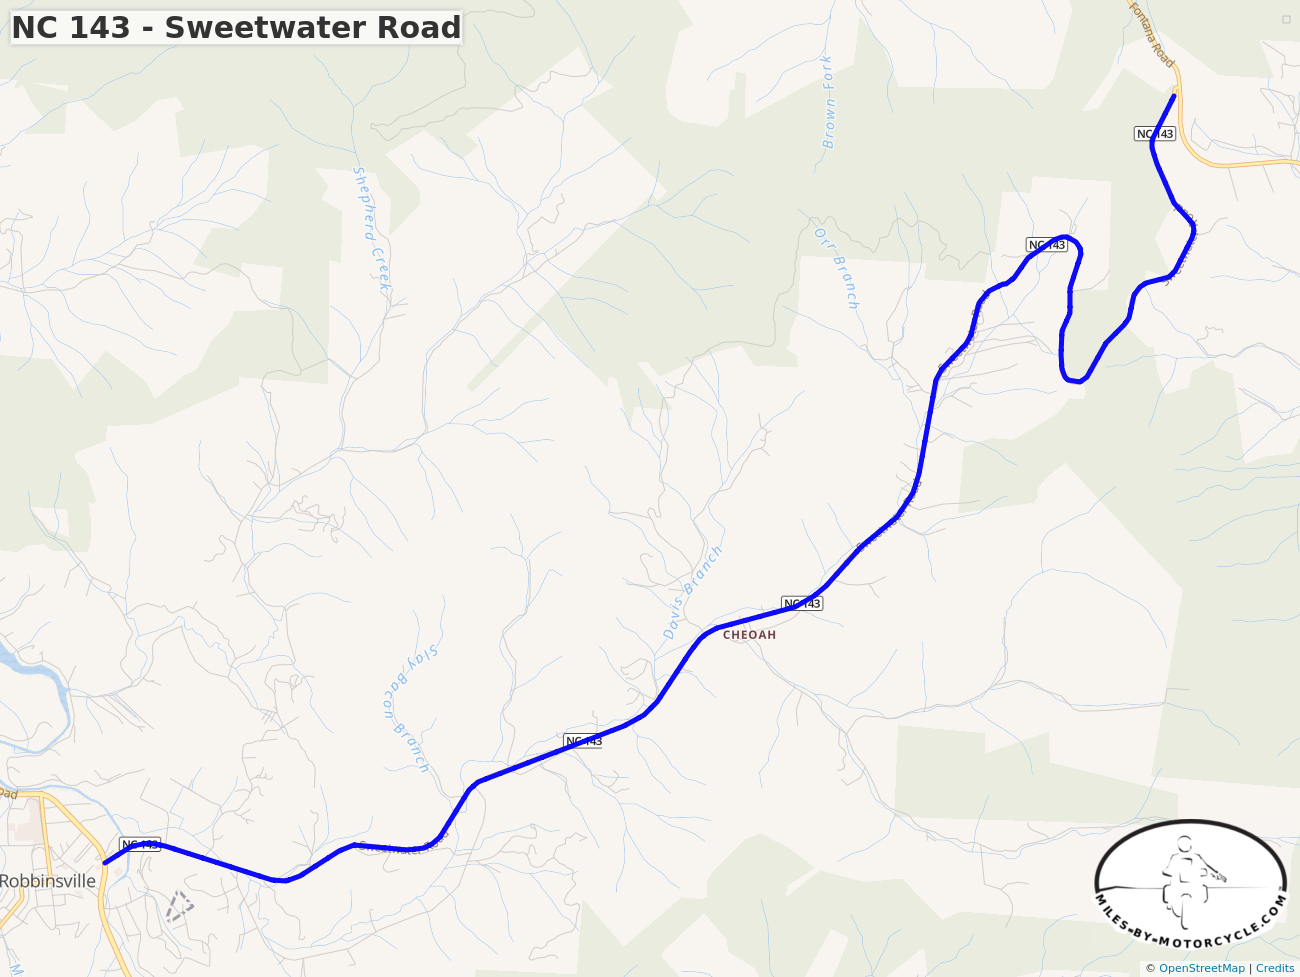 NC 143 - Sweetwater Road